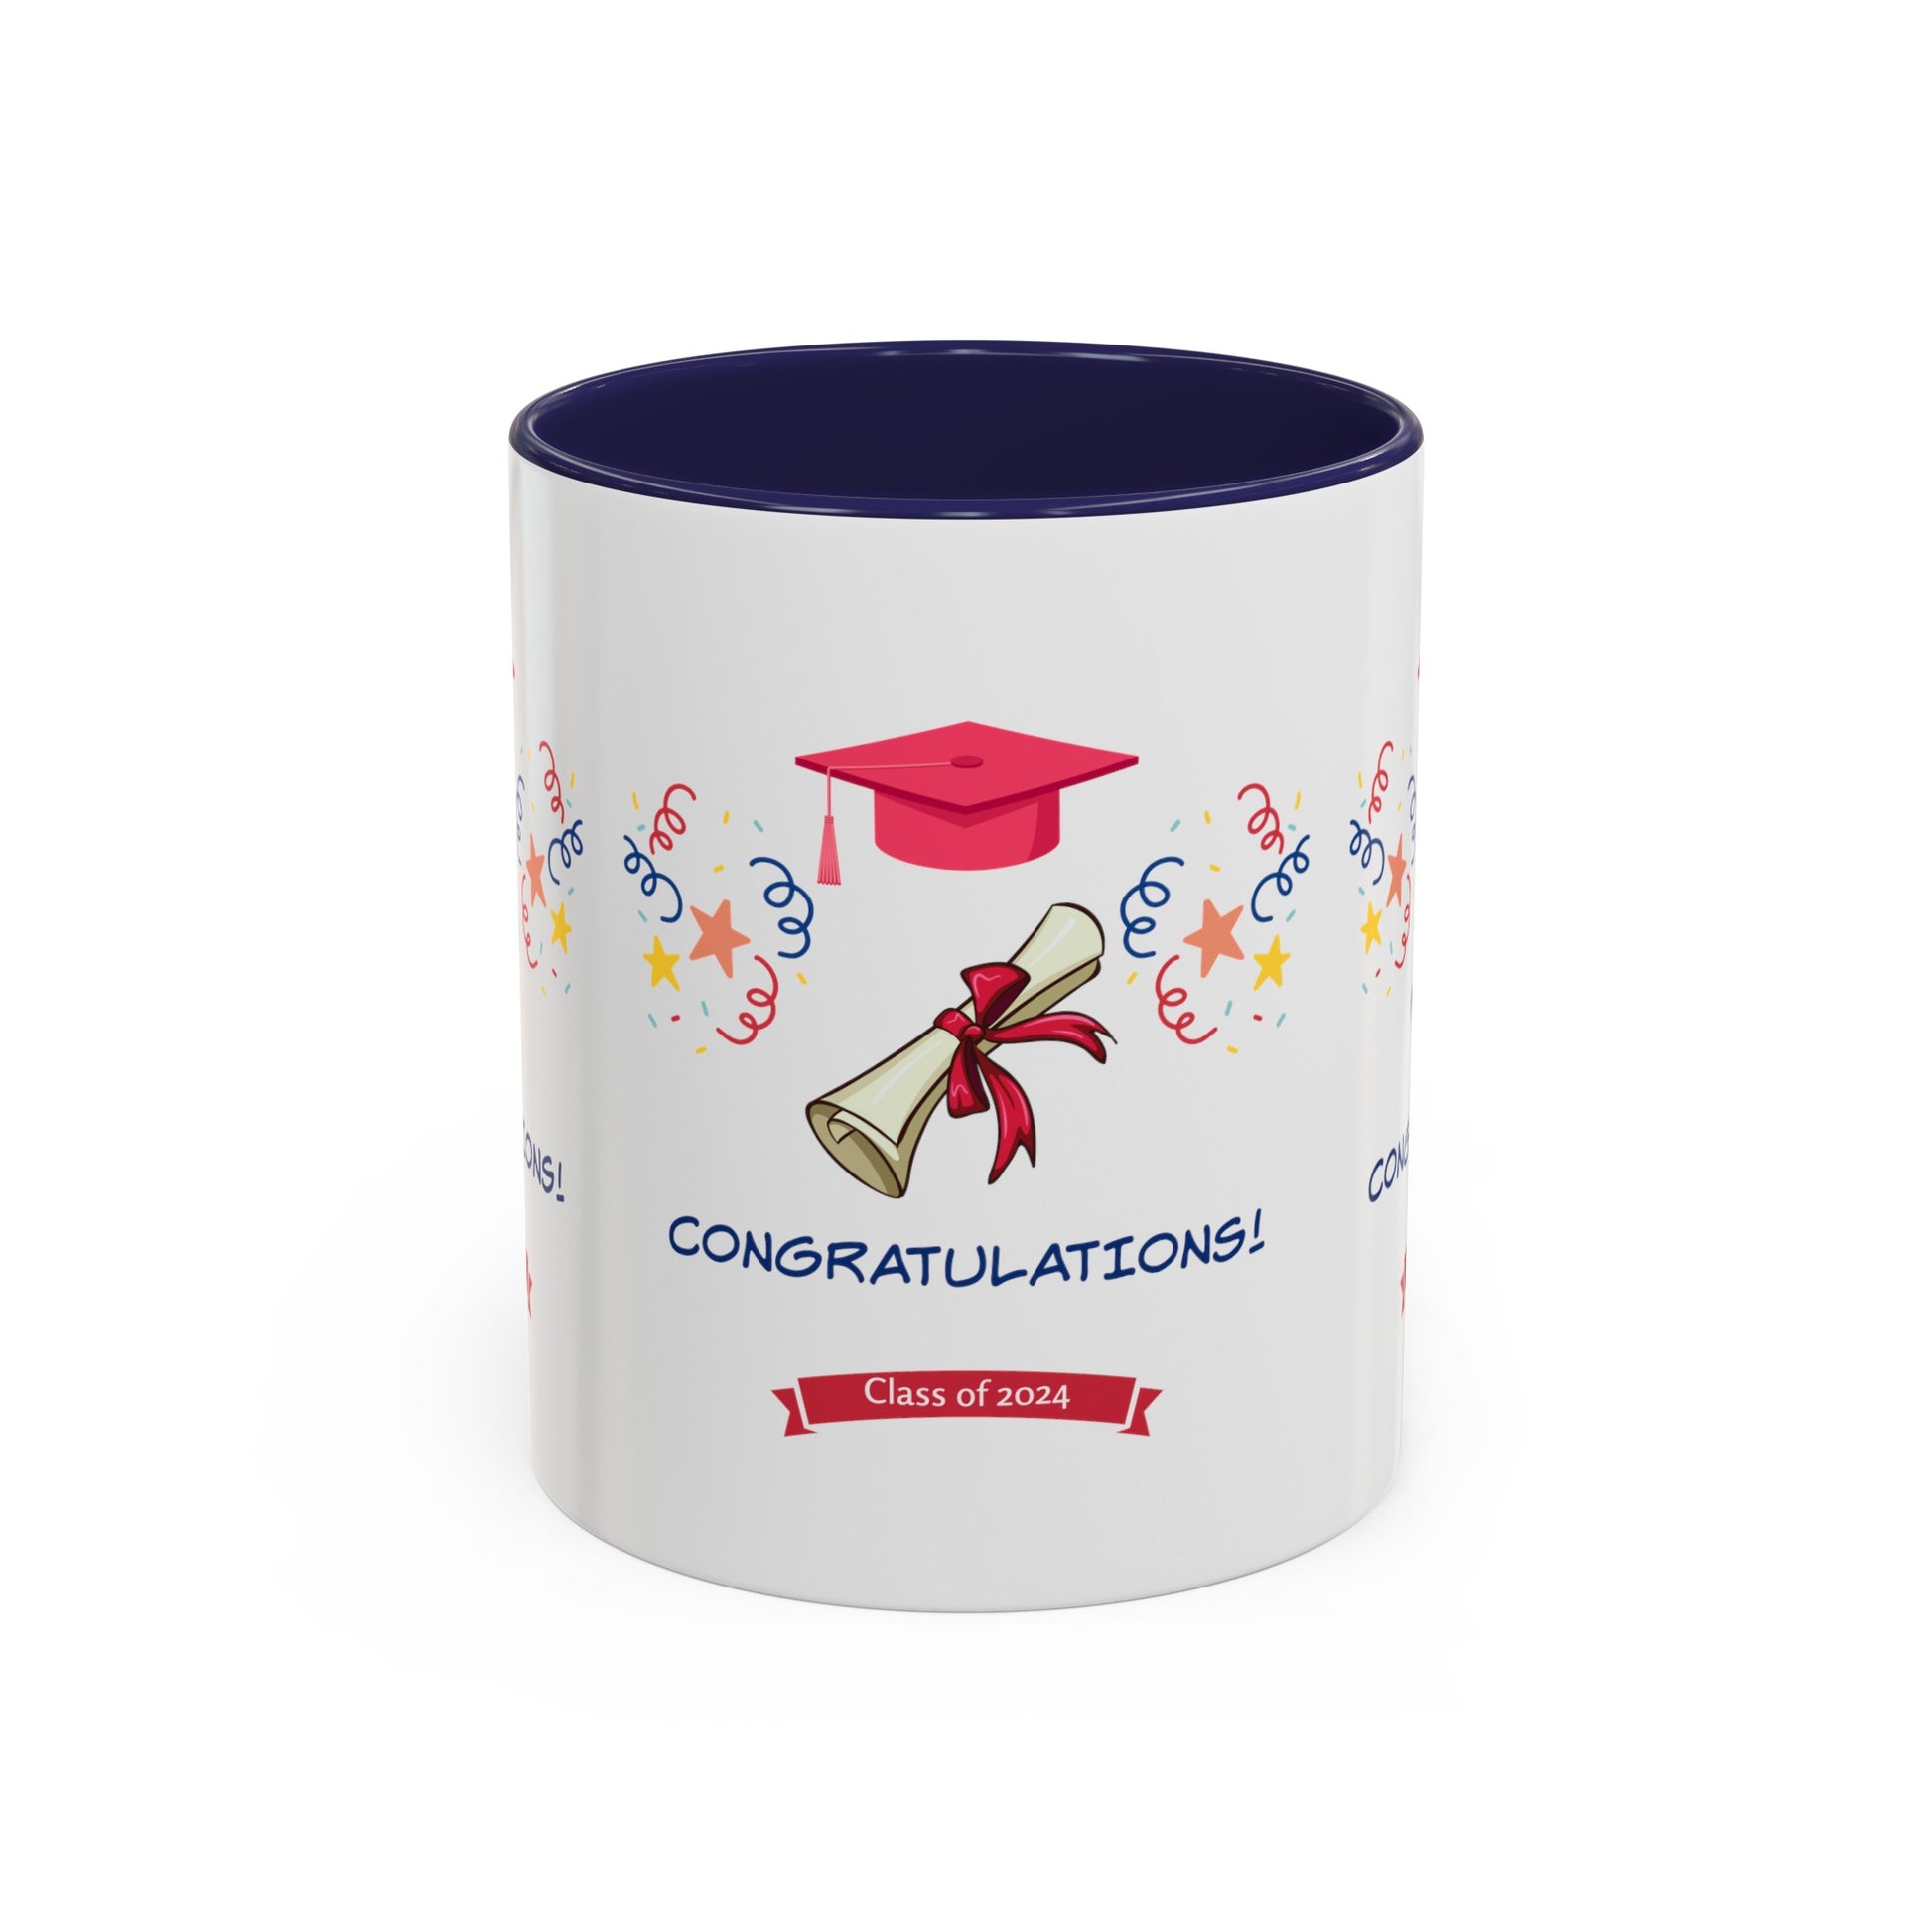 White American-made mug with a red graduation cap, diploma tied with a red ribbon, confetti, and stars. The text reads "CONGRATULATIONS!" and "Class of 2024." Blue interior. Perfect custom Printify 2024 Congratulations Mug: Graduation; 11 oz.; 2 Colors for celebrating your achievements!